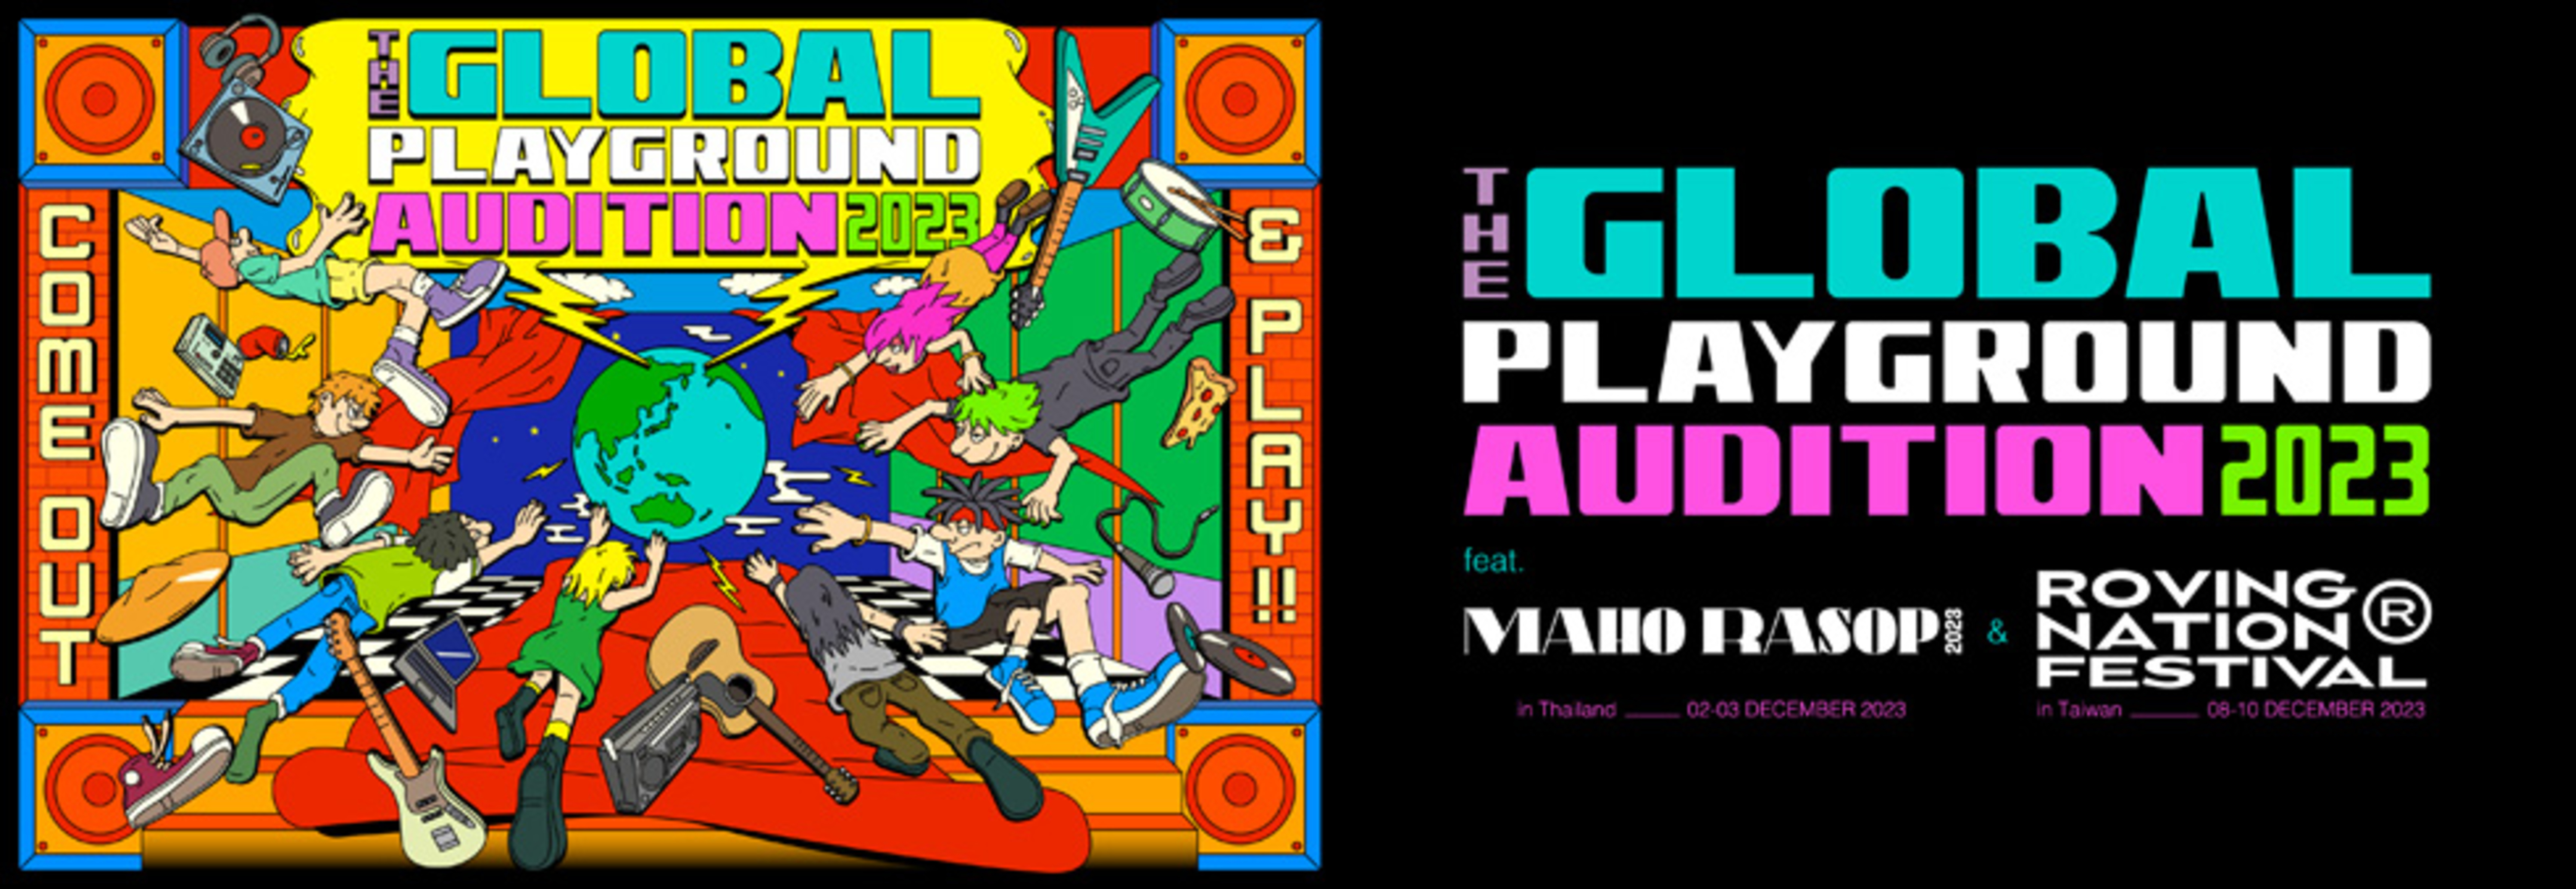 THE GLOBAL PLAYGROUND AUDITION 2023 - feat. MAHO RASOP & ROVING NATION FESTIVAL